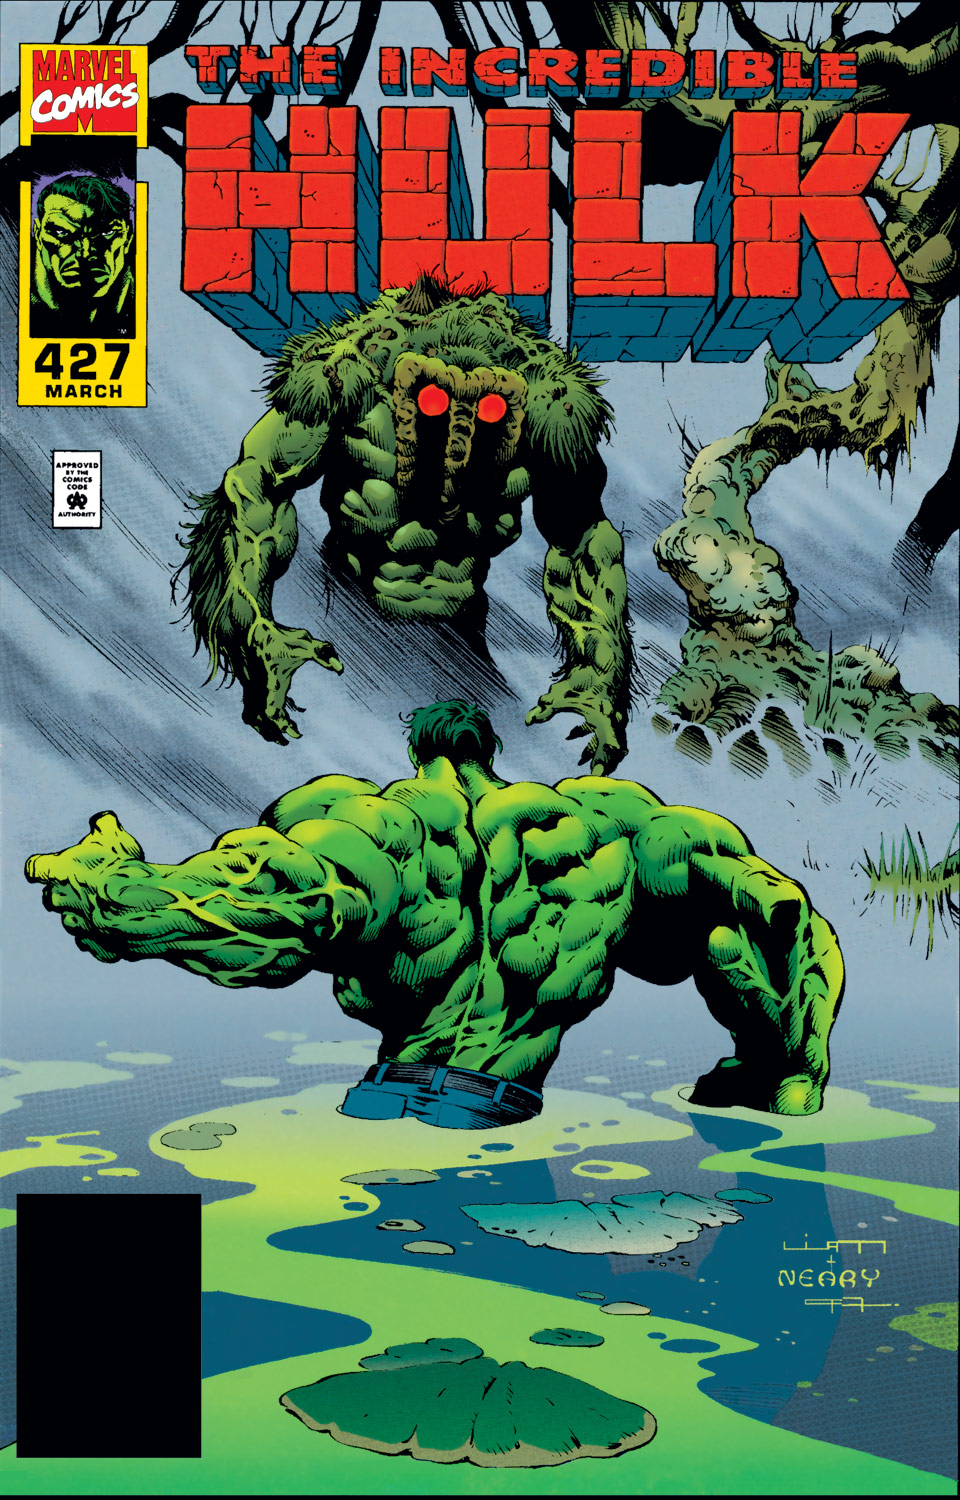 The Incredible Hulk 427 (1995). Cover by Liam Sharp and Paul Neary